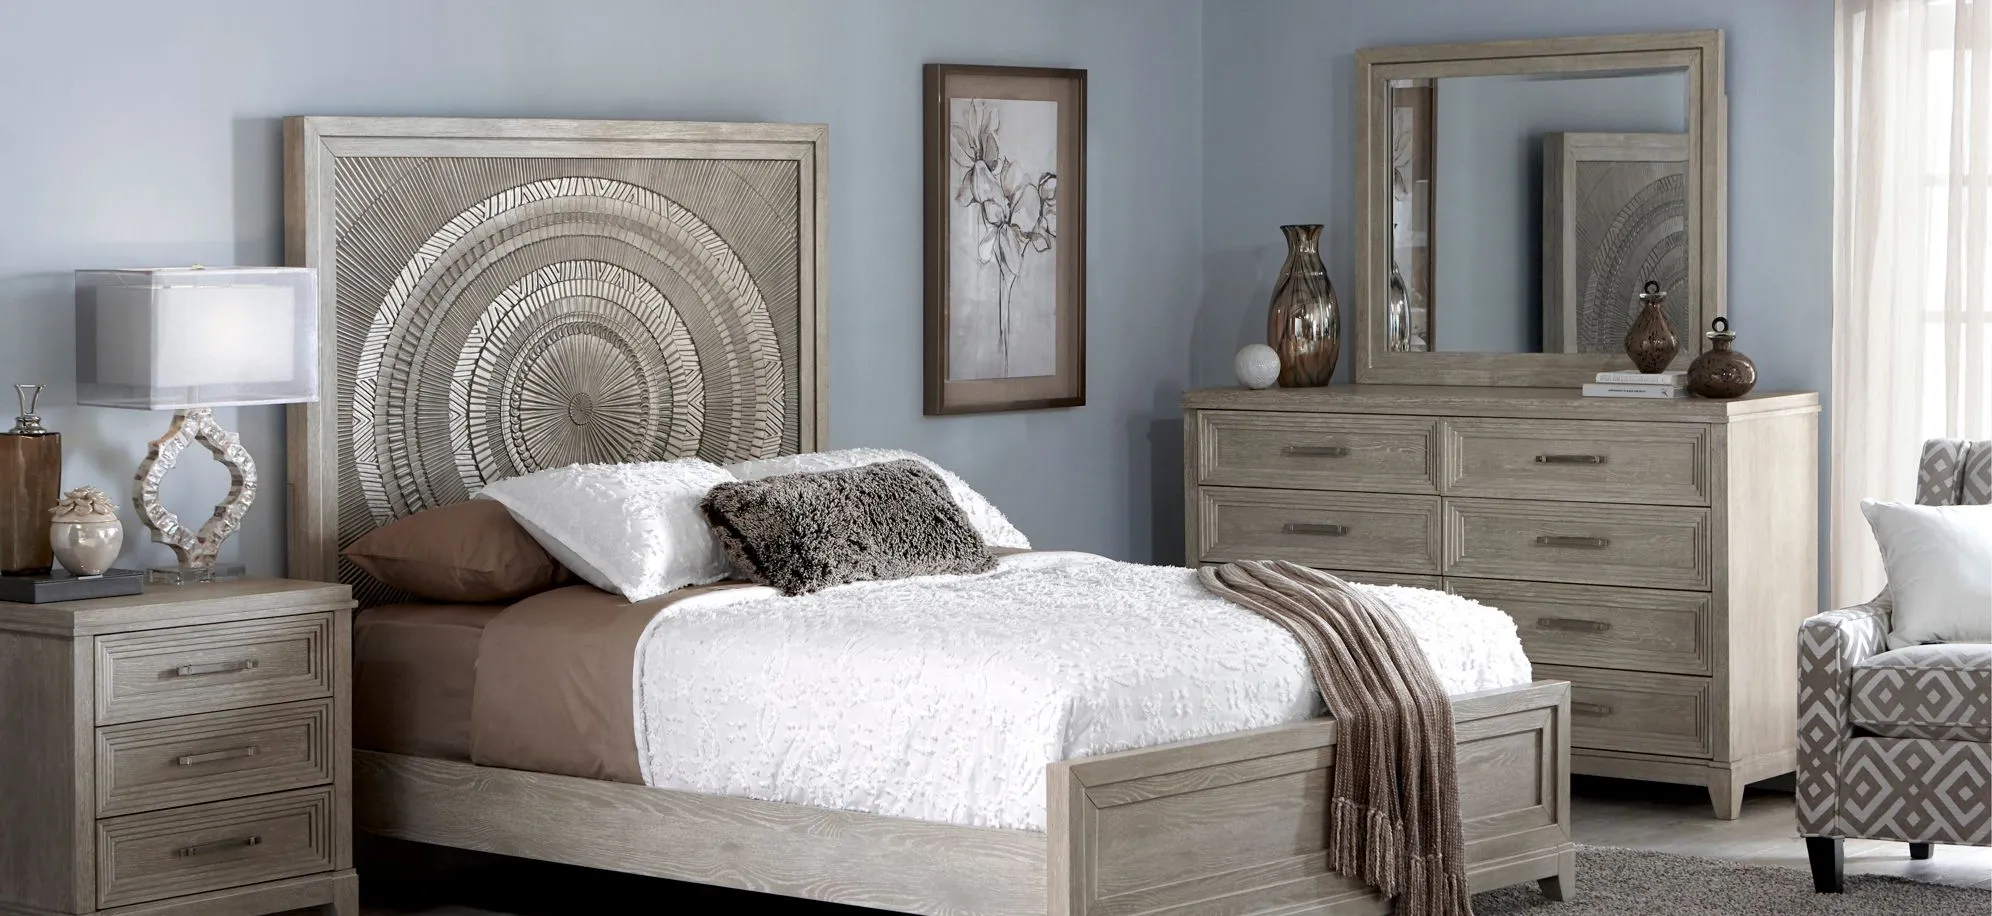 Montara 4-pc. Bedroom Set in Washed Taupe Silver Champagne by Liberty Furniture